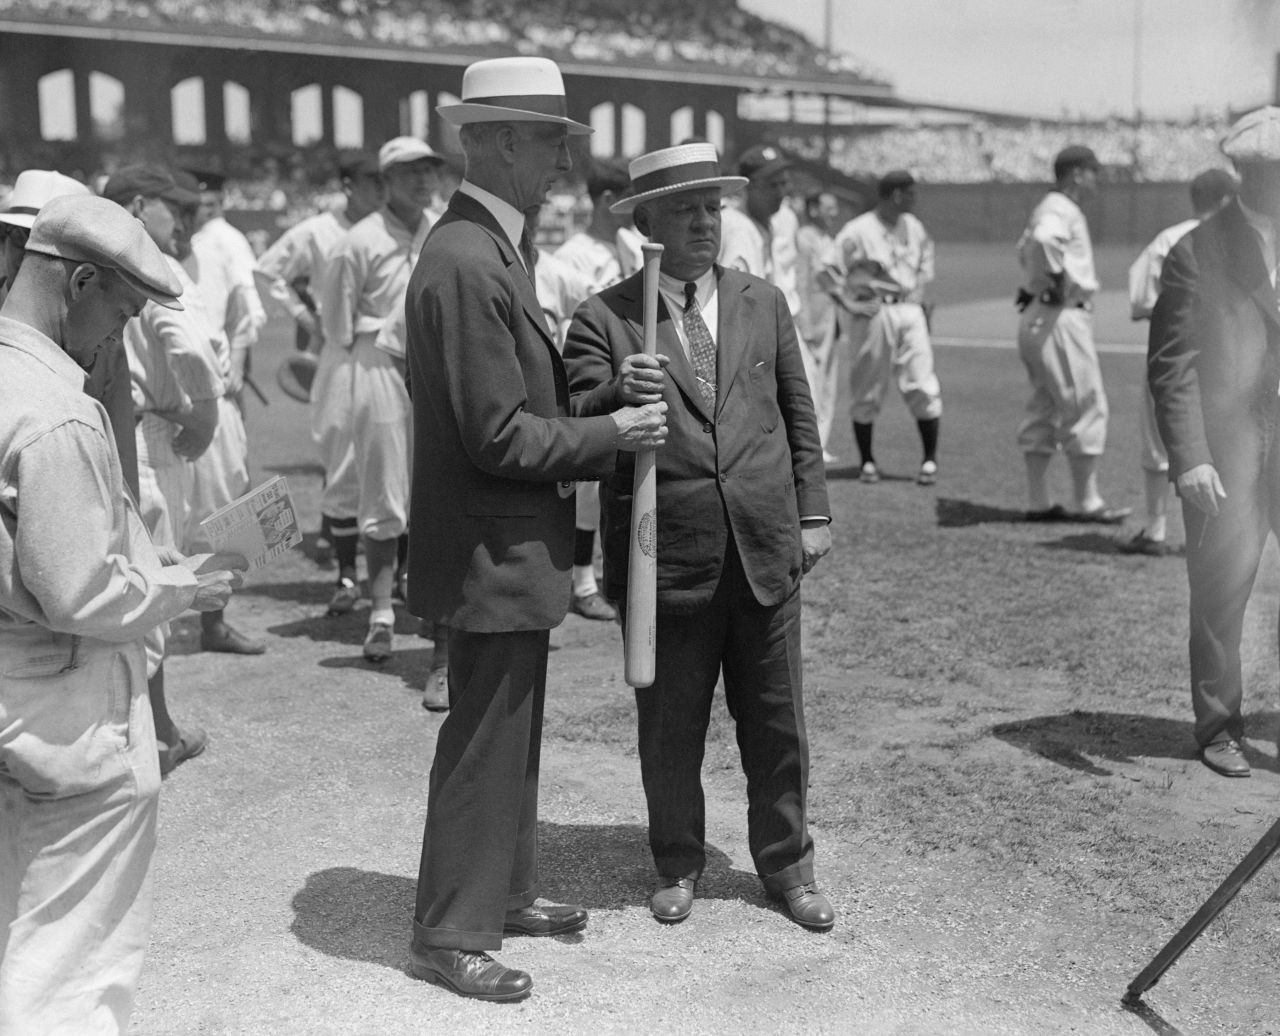 American League manager Connie Mack, left, and National League manager John McGraw play a sandlot "hand-over-hand" game to determine which team would bat first in the 1933 All-Star Game.